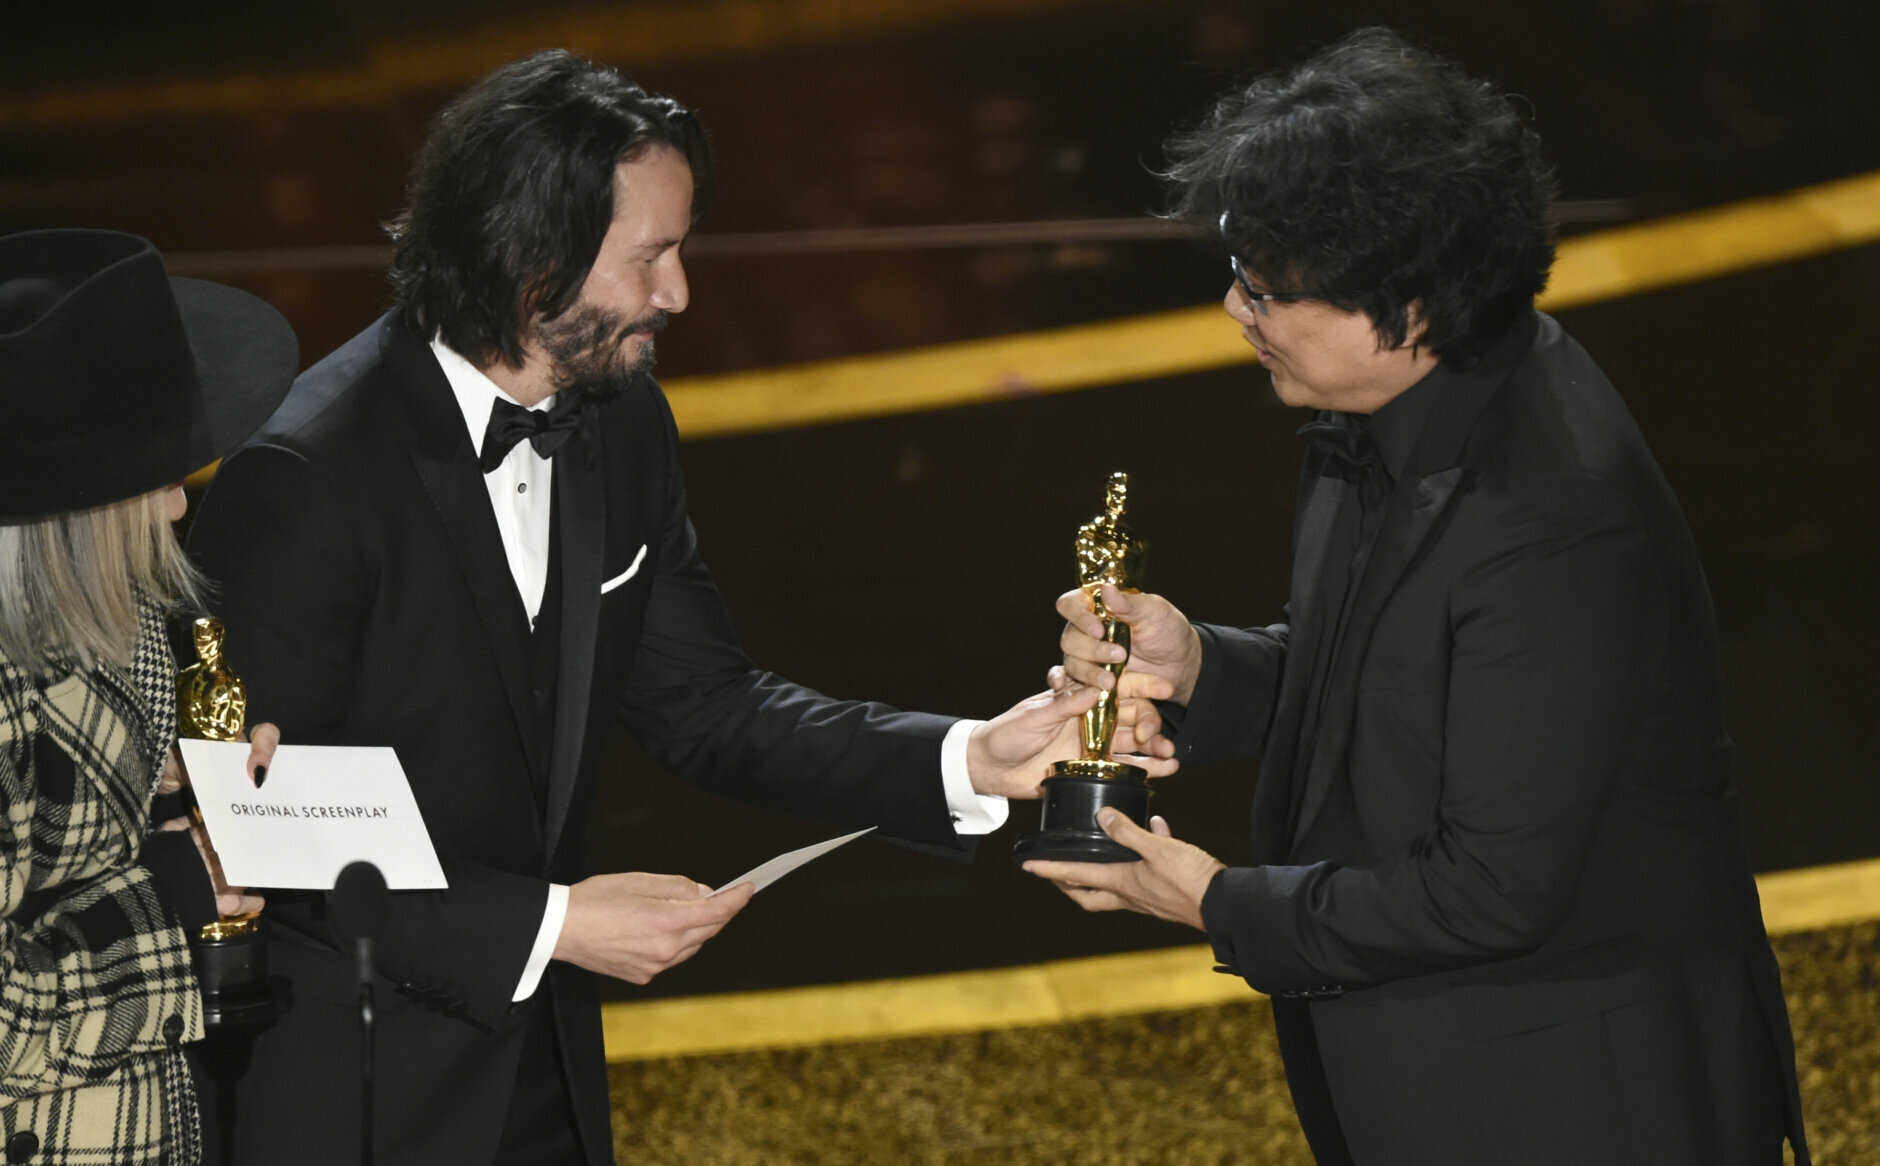 Diane Keaton, from left, and Keanu Reeves present the award for best original screenplay to Bong Joon Ho for "Parasite" at the Oscars on Sunday, Feb. 9, 2020, at the Dolby Theatre in Los Angeles. (AP Photo/Chris Pizzello)